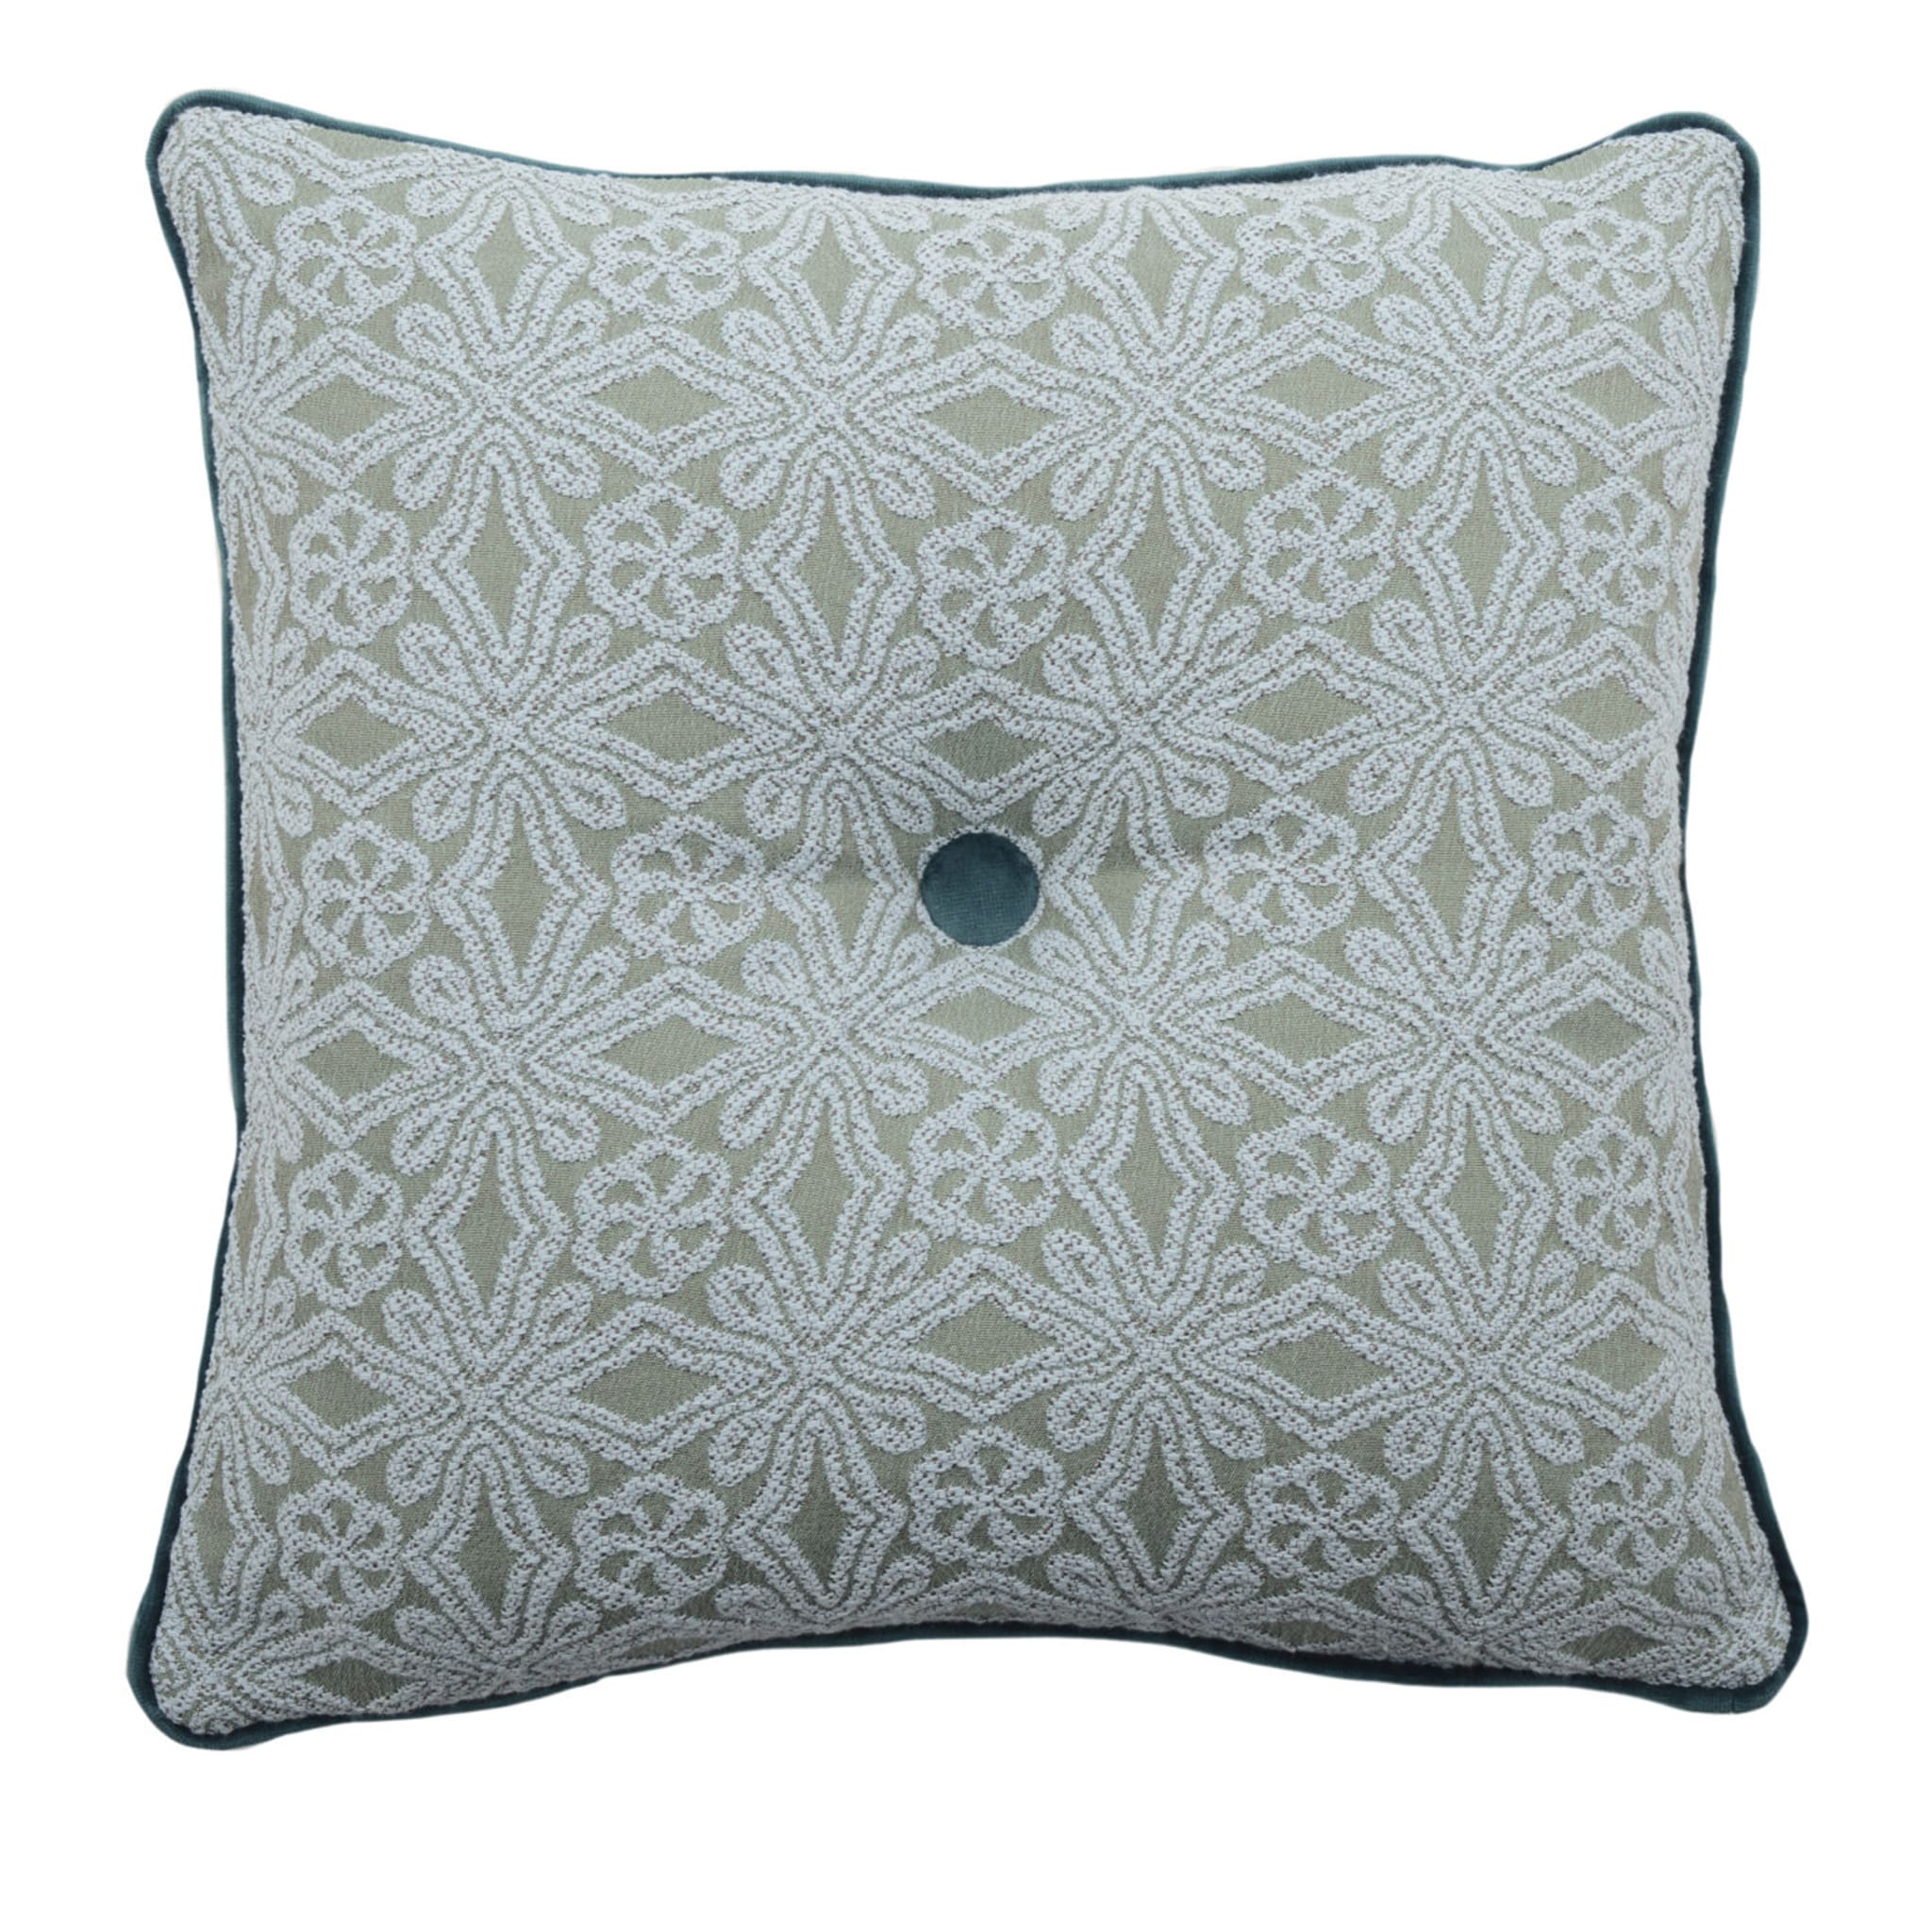 Tiffany Carré Cushion in floreal jacquard fabric - Main view